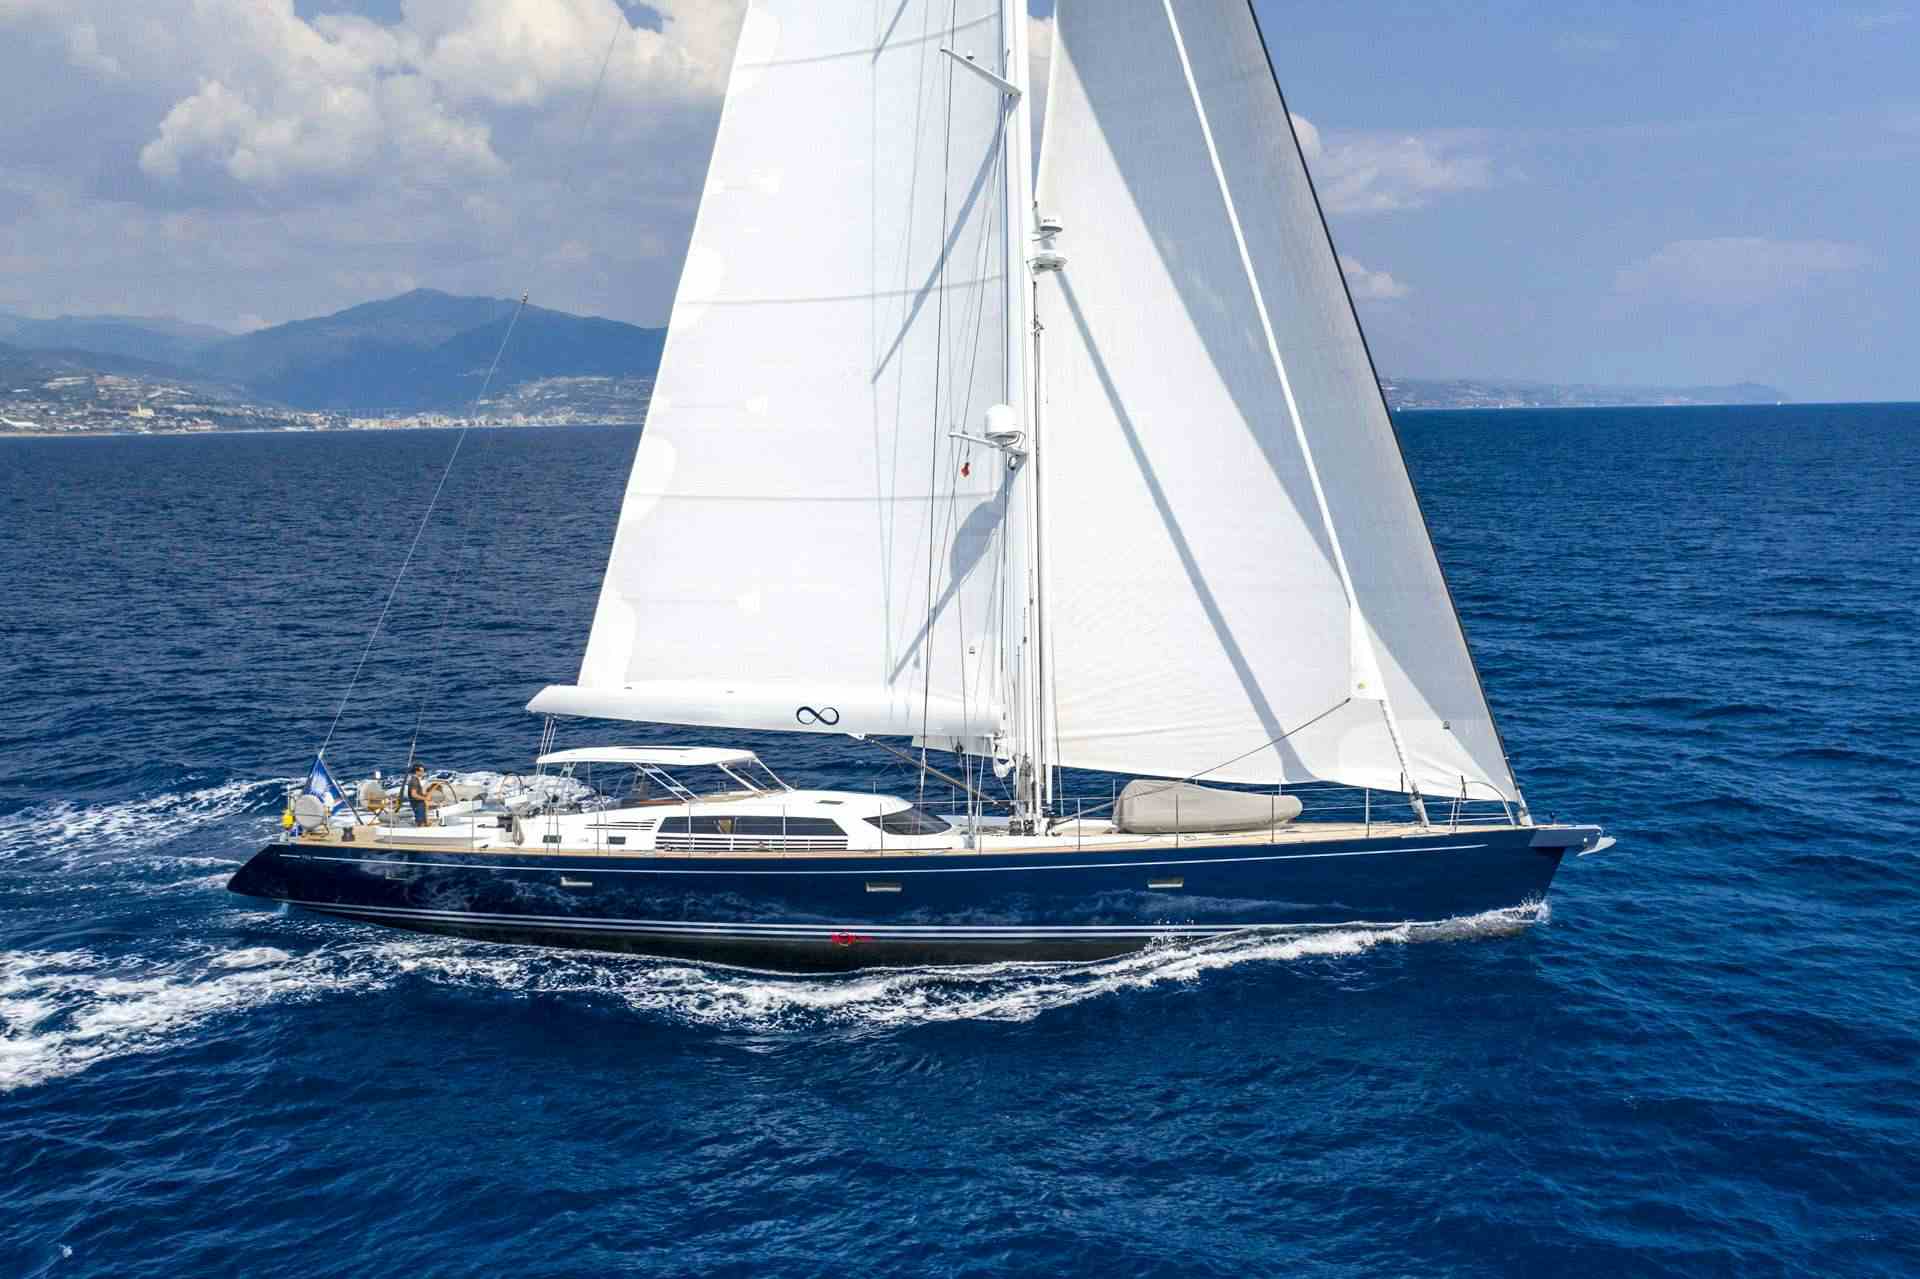 LADY 8 - Sailboat Charter Spain & Boat hire in W. Med -Naples/Sicily, W. Med -Riviera/Cors/Sard., Caribbean Leewards, Caribbean Windwards, Turkey, W. Med - Spain/Balearics, Caribbean Leewards, Caribbean Windwards 1